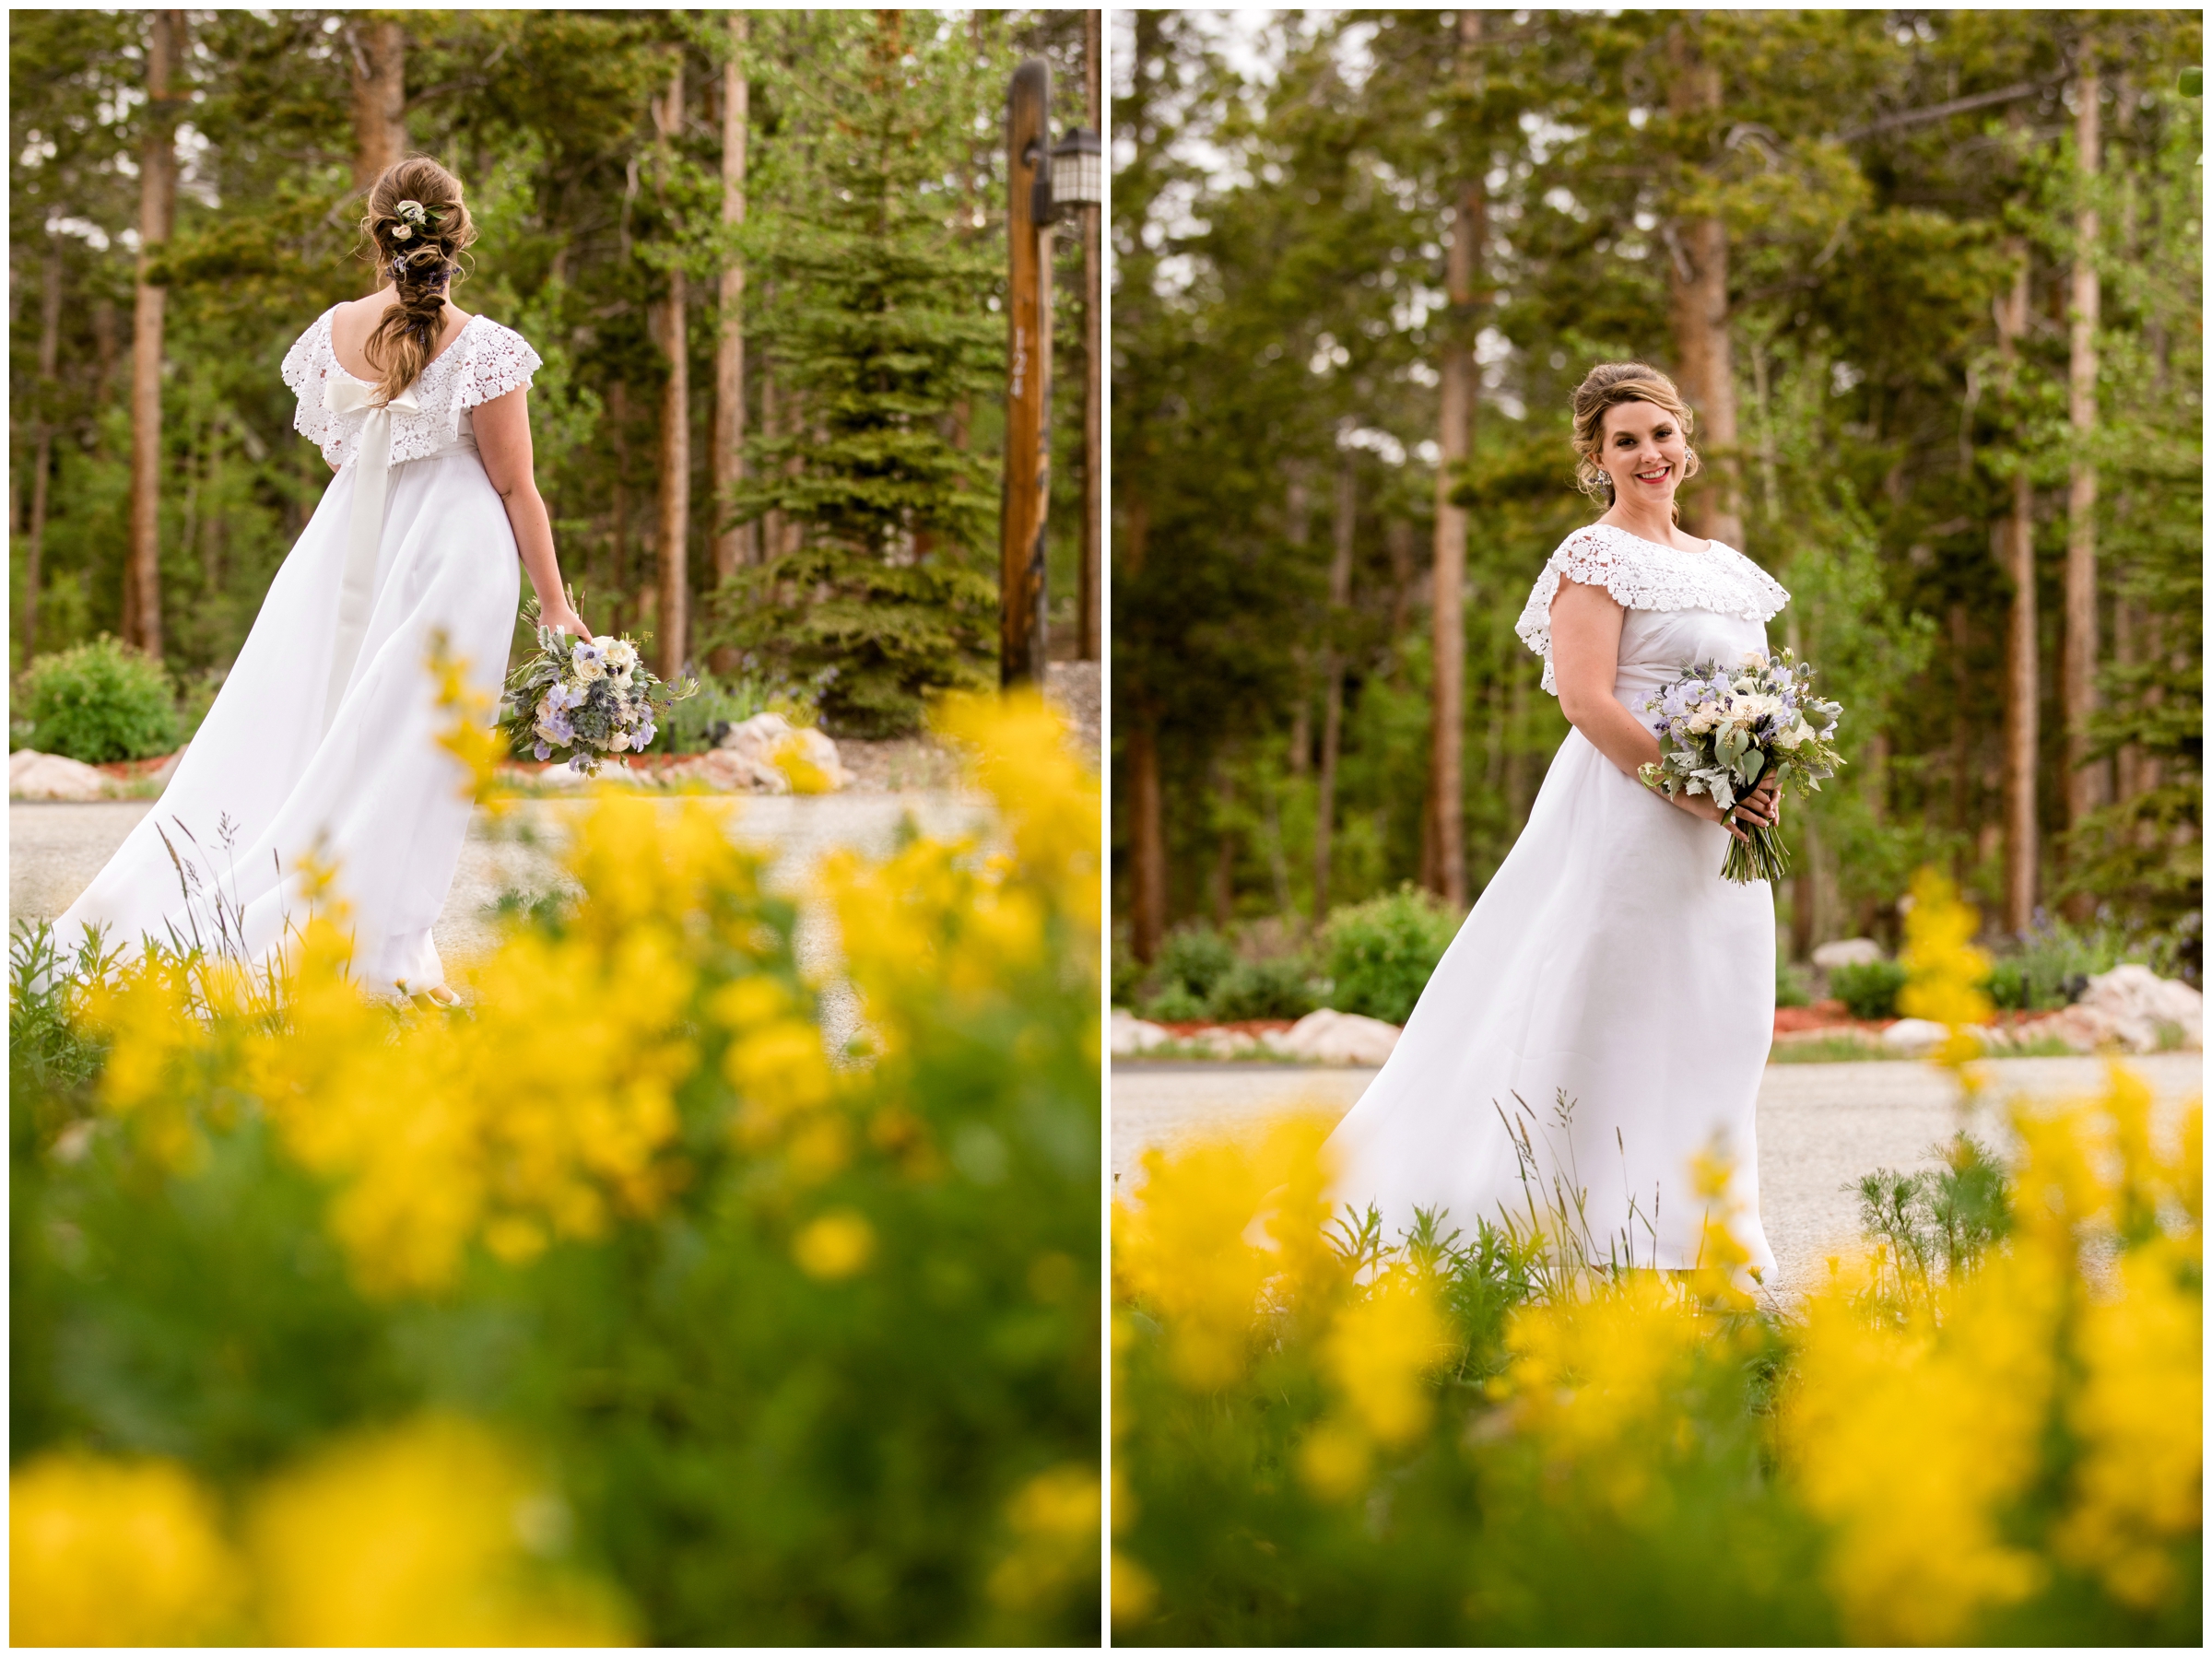 Colorado bride posing amongst yellow wildflowers during Breckenridge Colorado wedding portraits at at the Lodge at Breck